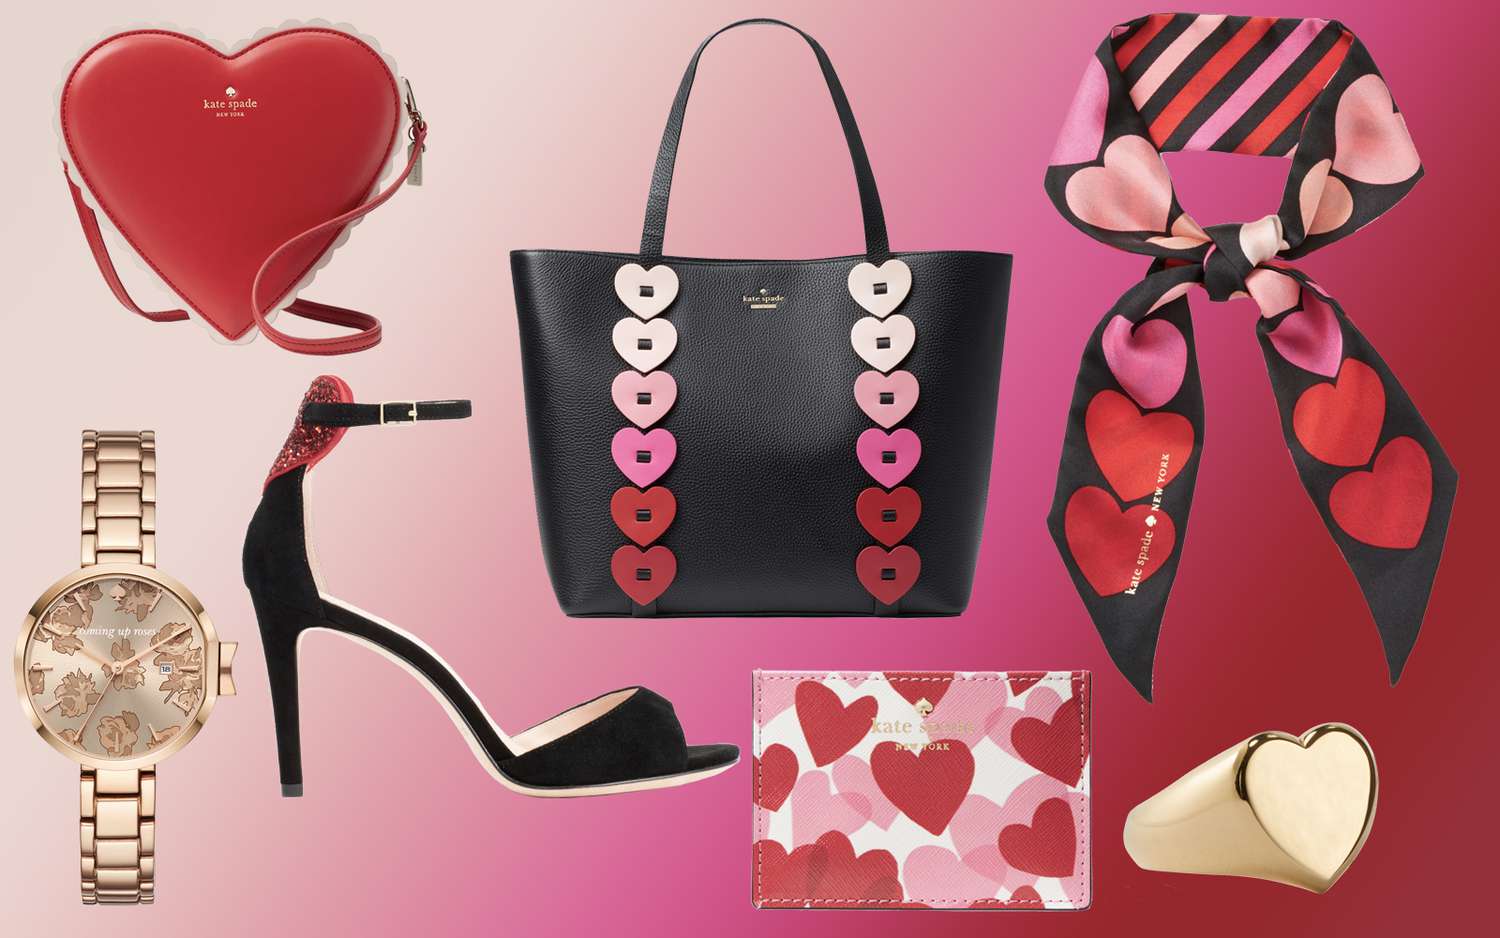 Kate Spade Valentine's Day Gift Ideas That Are Super Cute | PEOPLE.com